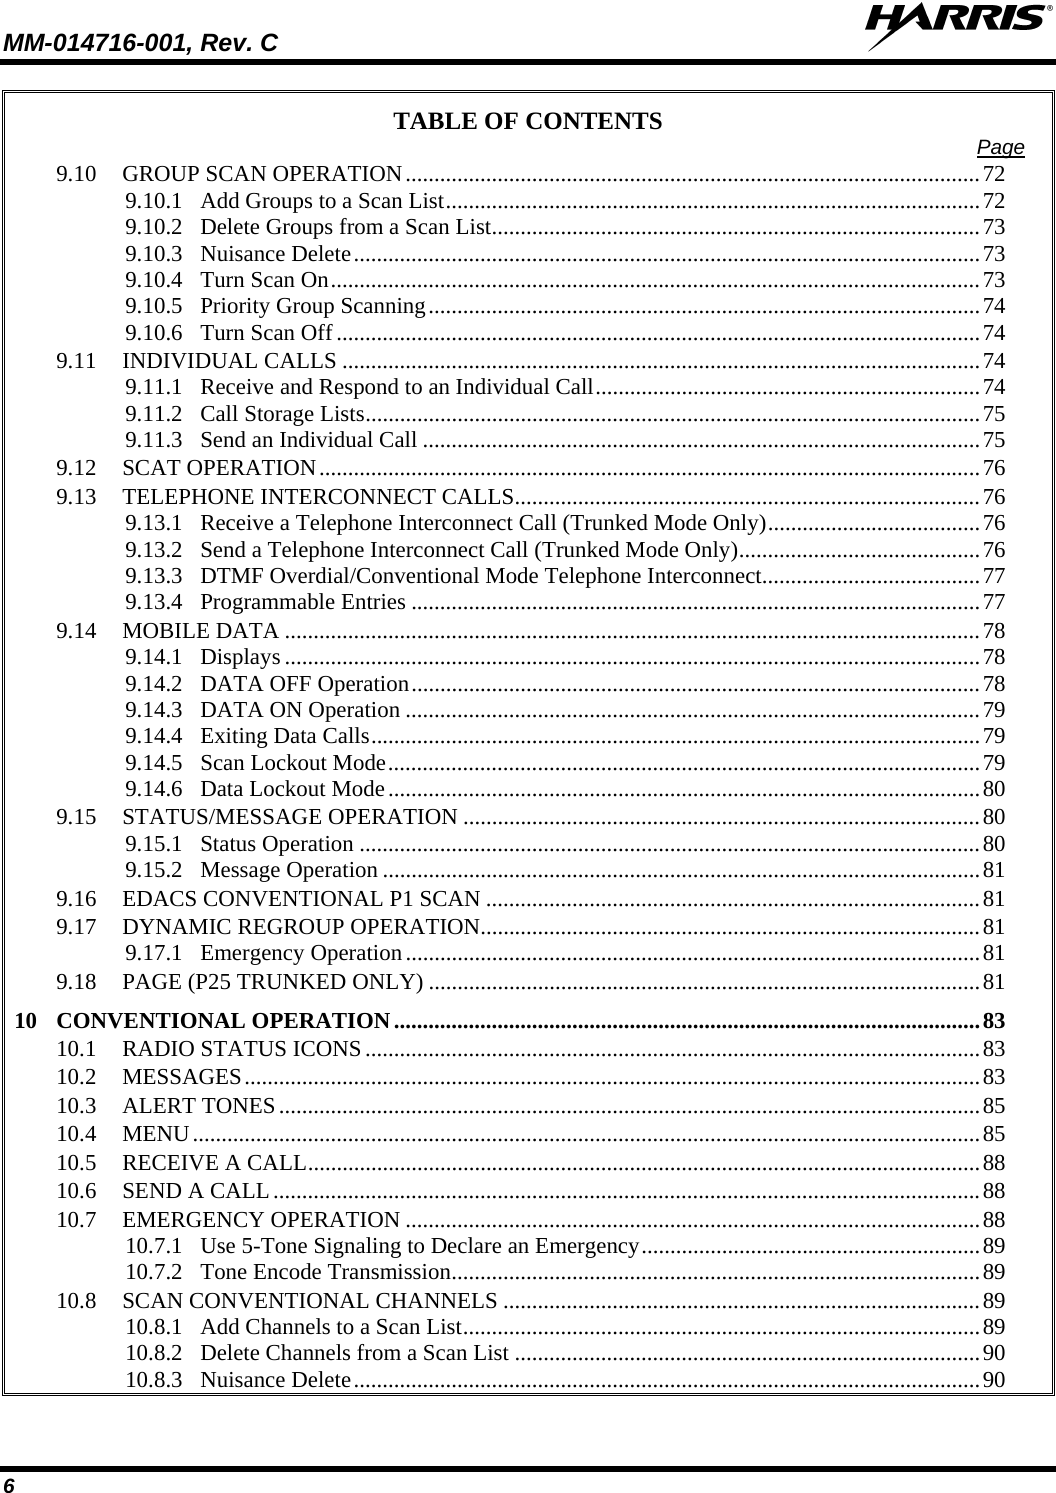 MM-014716-001, Rev. C  6 TABLE OF CONTENTS  Page 9.10 GROUP SCAN OPERATION....................................................................................................72 9.10.1 Add Groups to a Scan List.............................................................................................72 9.10.2 Delete Groups from a Scan List.....................................................................................73 9.10.3 Nuisance Delete.............................................................................................................73 9.10.4 Turn Scan On.................................................................................................................73 9.10.5 Priority Group Scanning................................................................................................74 9.10.6 Turn Scan Off................................................................................................................74 9.11 INDIVIDUAL CALLS ...............................................................................................................74 9.11.1 Receive and Respond to an Individual Call...................................................................74 9.11.2 Call Storage Lists...........................................................................................................75 9.11.3 Send an Individual Call .................................................................................................75 9.12 SCAT OPERATION...................................................................................................................76 9.13 TELEPHONE INTERCONNECT CALLS.................................................................................76 9.13.1 Receive a Telephone Interconnect Call (Trunked Mode Only).....................................76 9.13.2 Send a Telephone Interconnect Call (Trunked Mode Only)..........................................76 9.13.3 DTMF Overdial/Conventional Mode Telephone Interconnect......................................77 9.13.4 Programmable Entries ...................................................................................................77 9.14 MOBILE DATA .........................................................................................................................78 9.14.1 Displays .........................................................................................................................78 9.14.2 DATA OFF Operation...................................................................................................78 9.14.3 DATA ON Operation ....................................................................................................79 9.14.4 Exiting Data Calls..........................................................................................................79 9.14.5 Scan Lockout Mode.......................................................................................................79 9.14.6 Data Lockout Mode.......................................................................................................80 9.15 STATUS/MESSAGE OPERATION ..........................................................................................80 9.15.1 Status Operation ............................................................................................................80 9.15.2 Message Operation ........................................................................................................81 9.16 EDACS CONVENTIONAL P1 SCAN ......................................................................................81 9.17 DYNAMIC REGROUP OPERATION.......................................................................................81 9.17.1 Emergency Operation....................................................................................................81 9.18 PAGE (P25 TRUNKED ONLY) ................................................................................................81 10 CONVENTIONAL OPERATION......................................................................................................83 10.1 RADIO STATUS ICONS...........................................................................................................83 10.2 MESSAGES................................................................................................................................83 10.3 ALERT TONES..........................................................................................................................85 10.4 MENU.........................................................................................................................................85 10.5 RECEIVE A CALL.....................................................................................................................88 10.6 SEND A CALL...........................................................................................................................88 10.7 EMERGENCY OPERATION ....................................................................................................88 10.7.1 Use 5-Tone Signaling to Declare an Emergency...........................................................89 10.7.2 Tone Encode Transmission............................................................................................89 10.8 SCAN CONVENTIONAL CHANNELS ...................................................................................89 10.8.1 Add Channels to a Scan List..........................................................................................89 10.8.2 Delete Channels from a Scan List .................................................................................90 10.8.3 Nuisance Delete.............................................................................................................90 